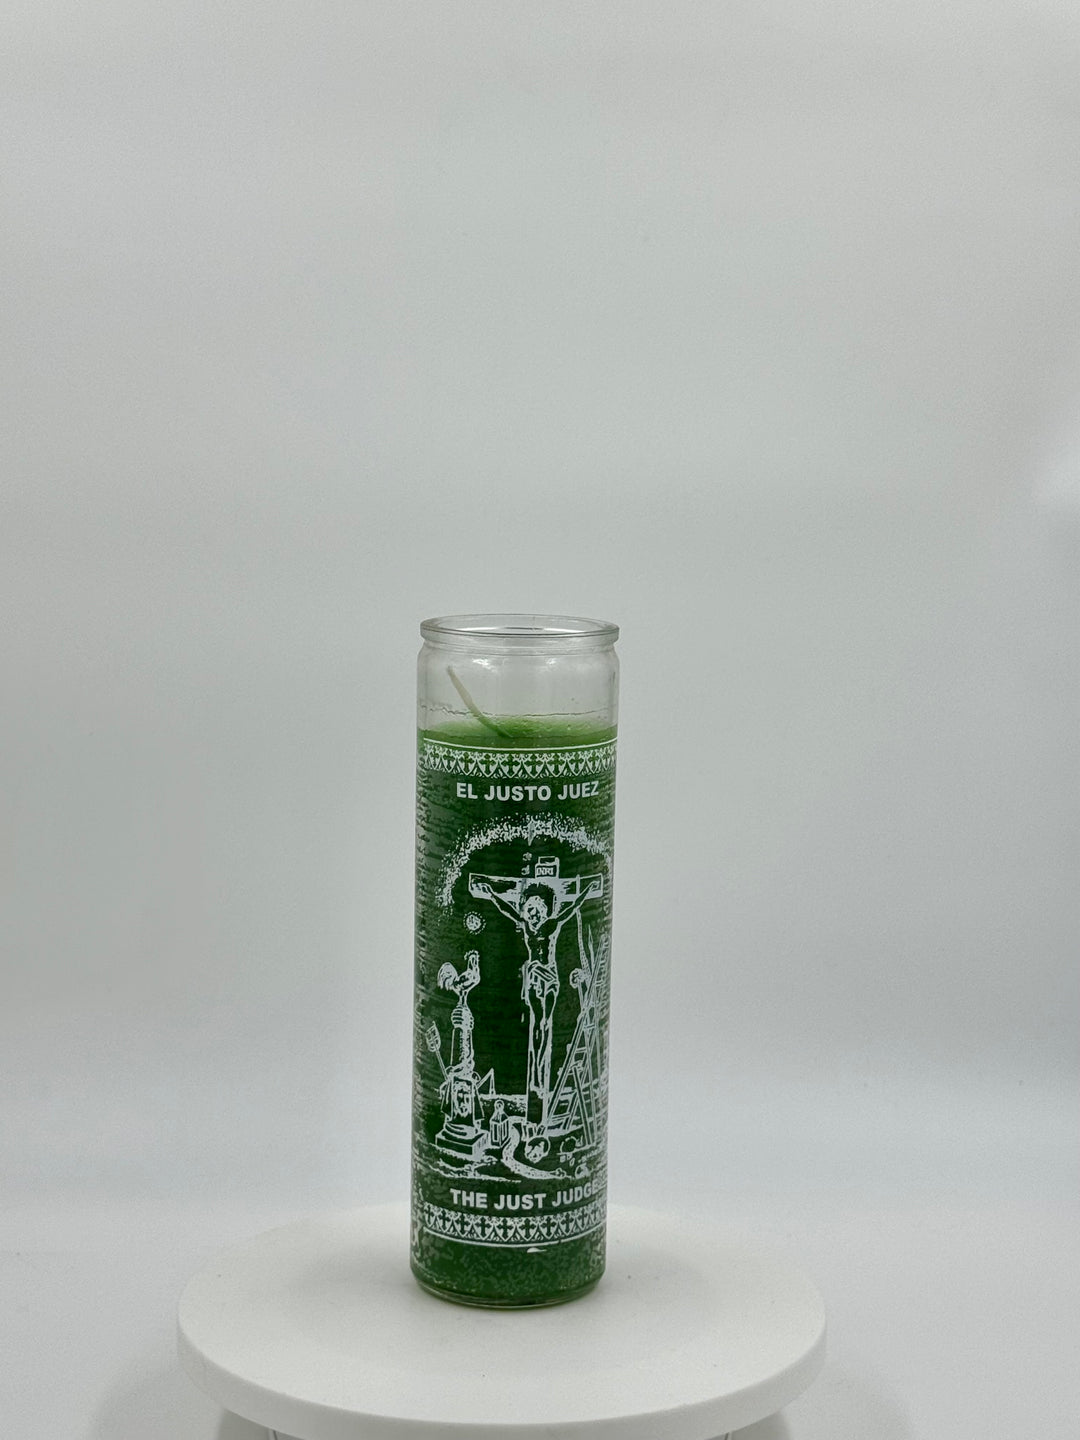 JUST JUDGE (JUSTO JUEZ) GREEN -Candle/Vela